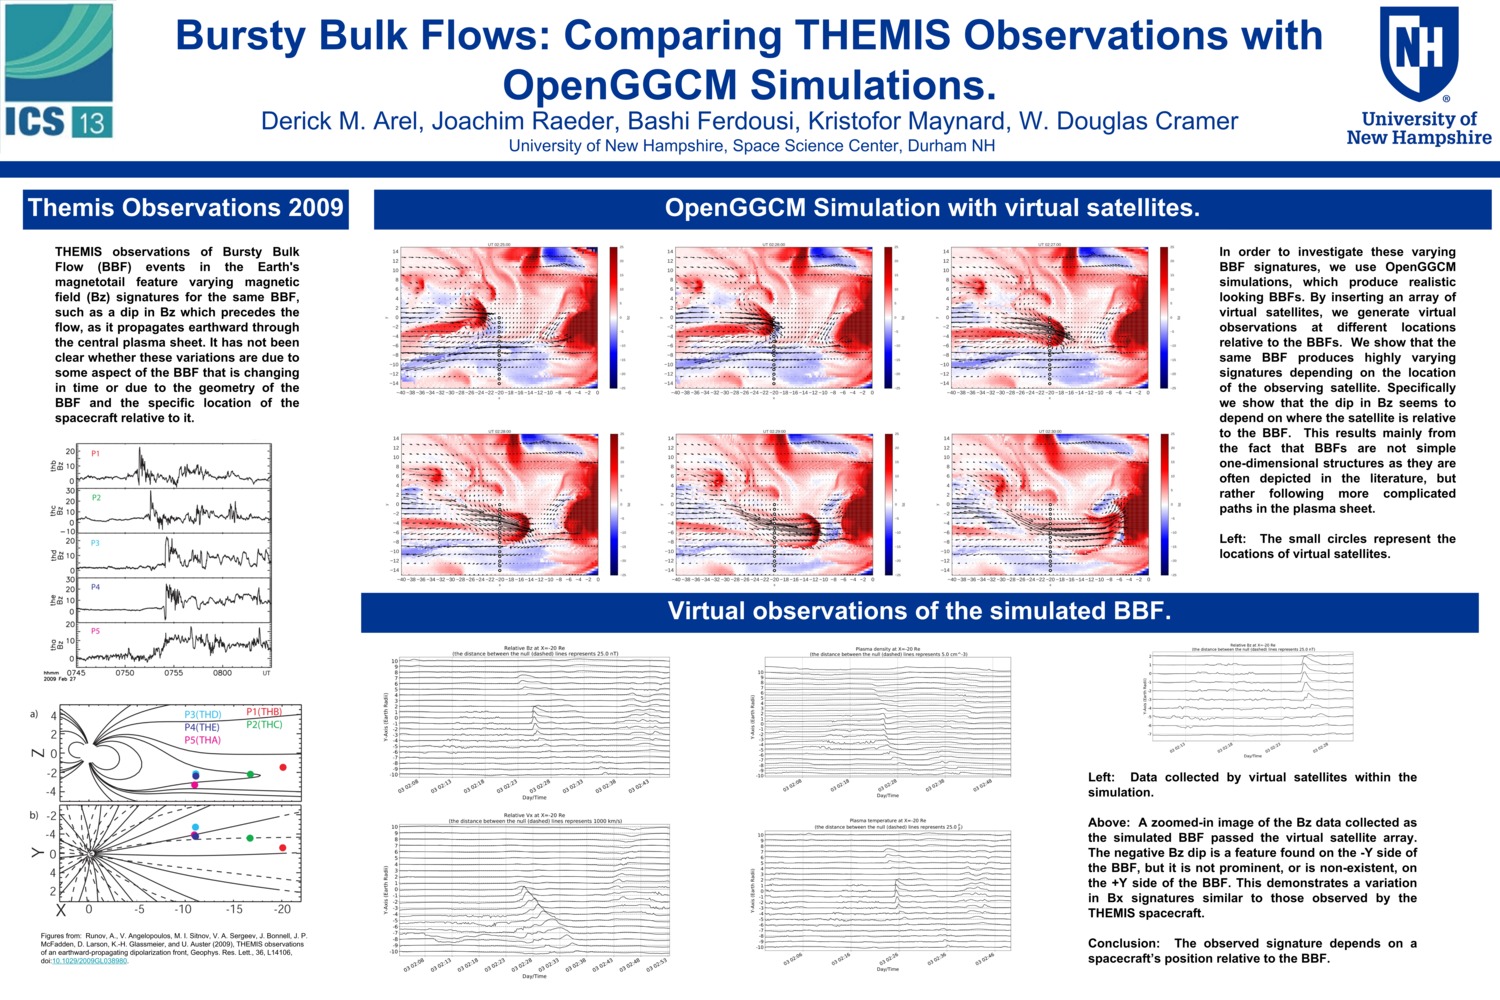 Bursty Bulk Flows: Comparing Themis Observations With Openggcm Simulations. by dma1011